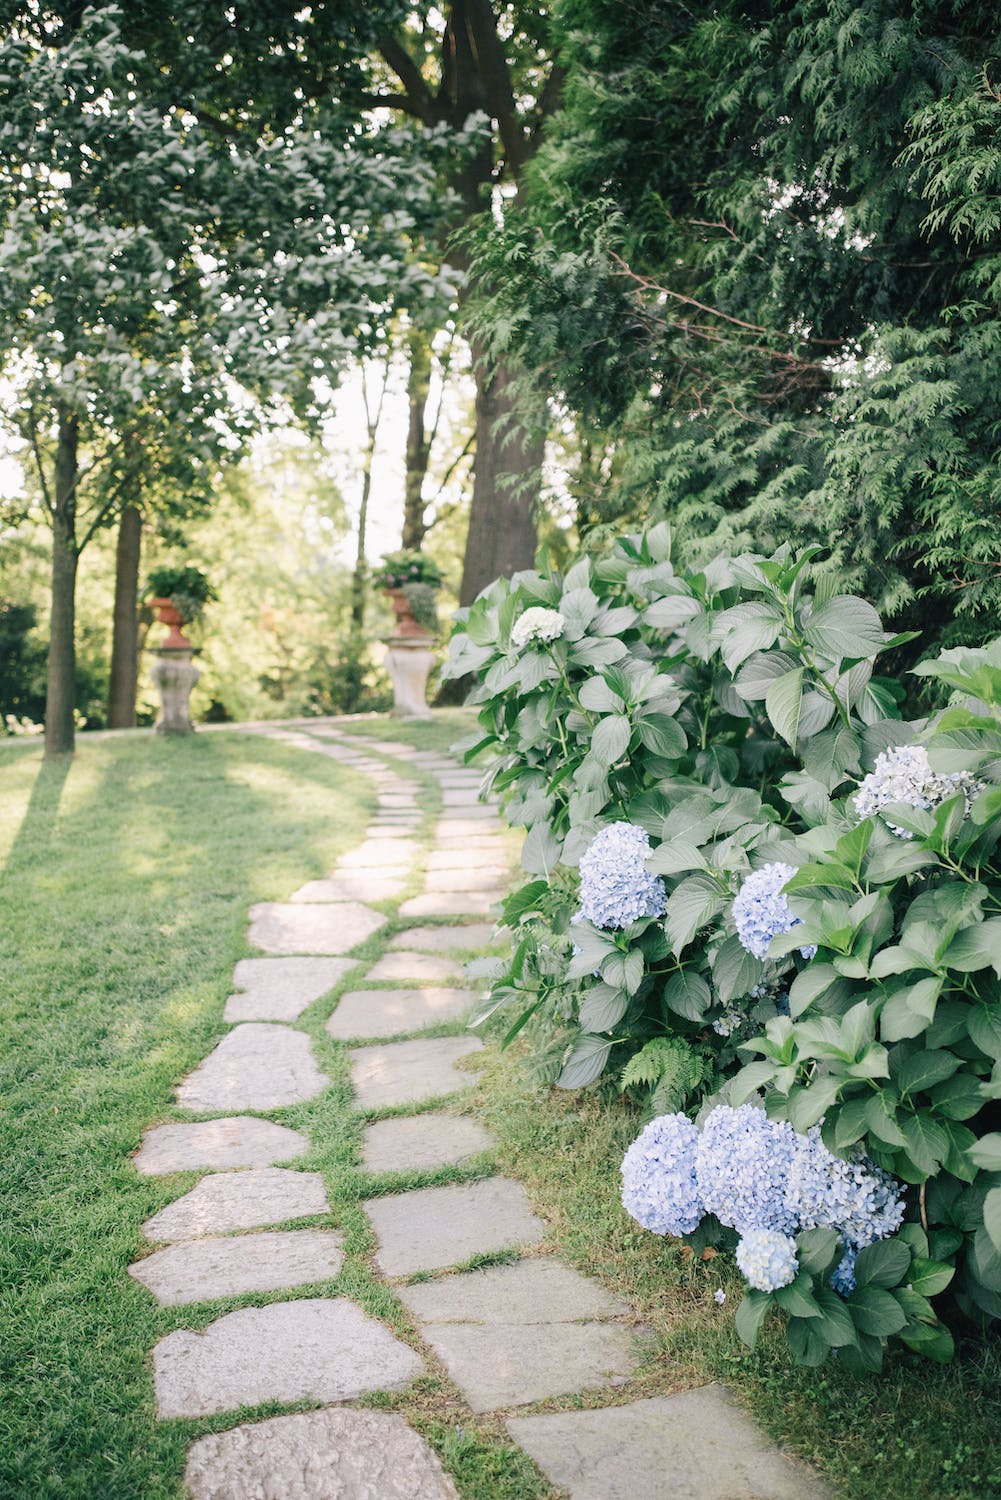 Landscaping your front yard with Hydrangeas